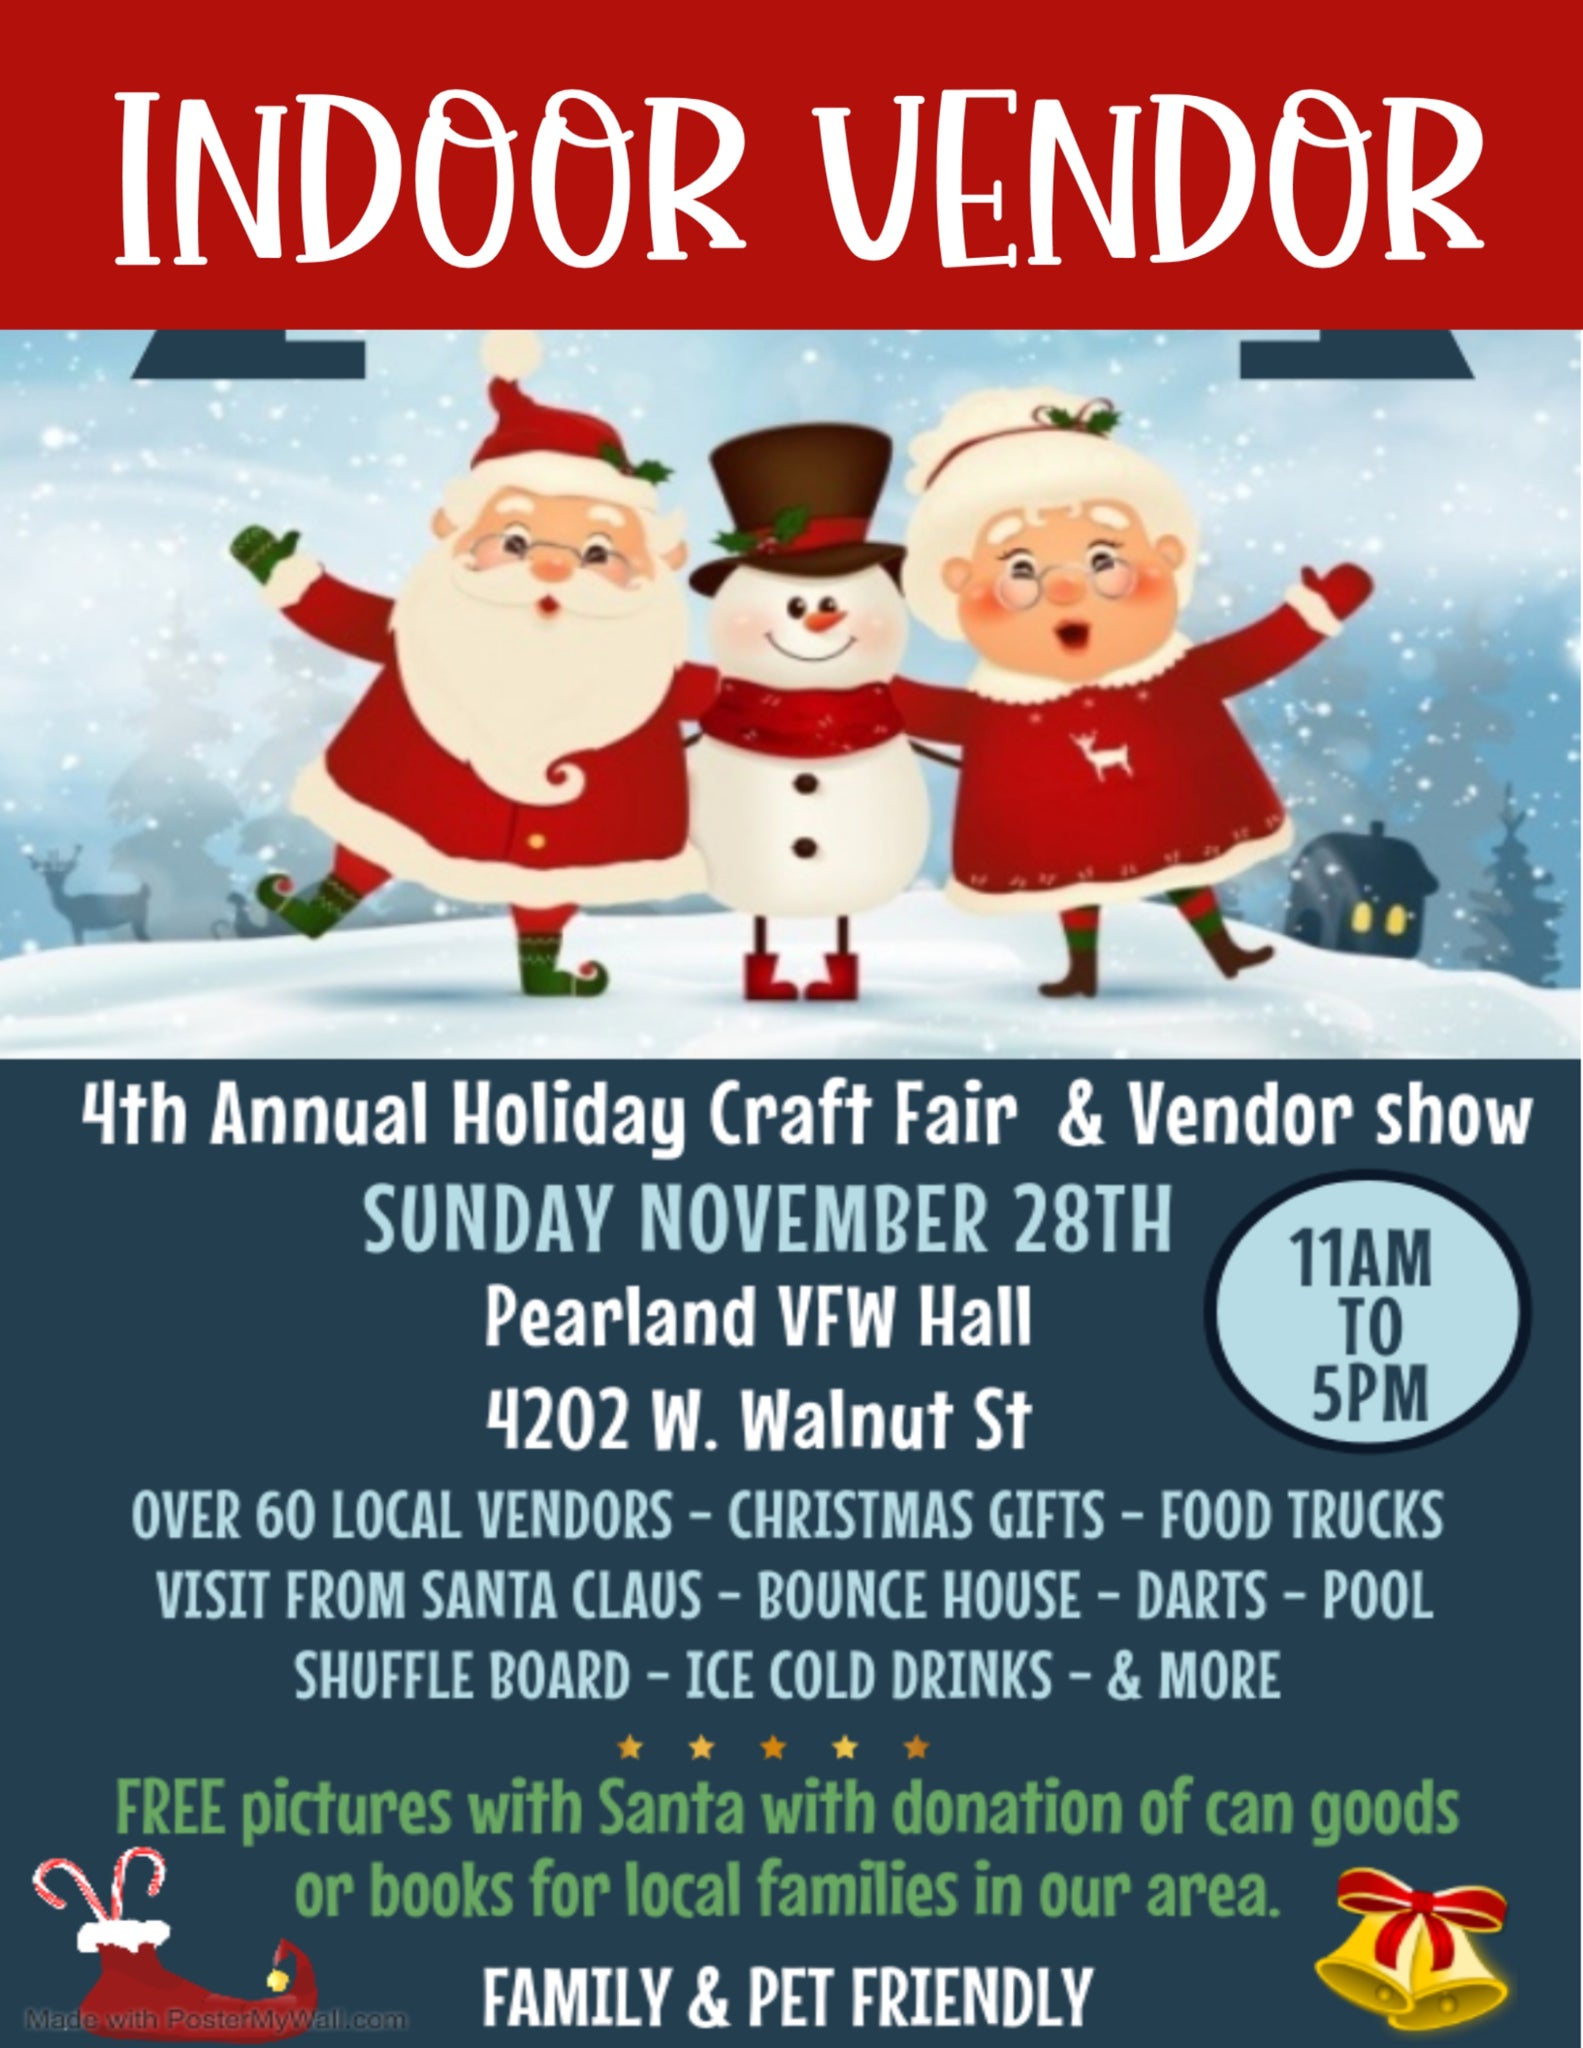 PEARLAND Sunday NOVEMBER 28TH, 2021- INDOOR BOOTH